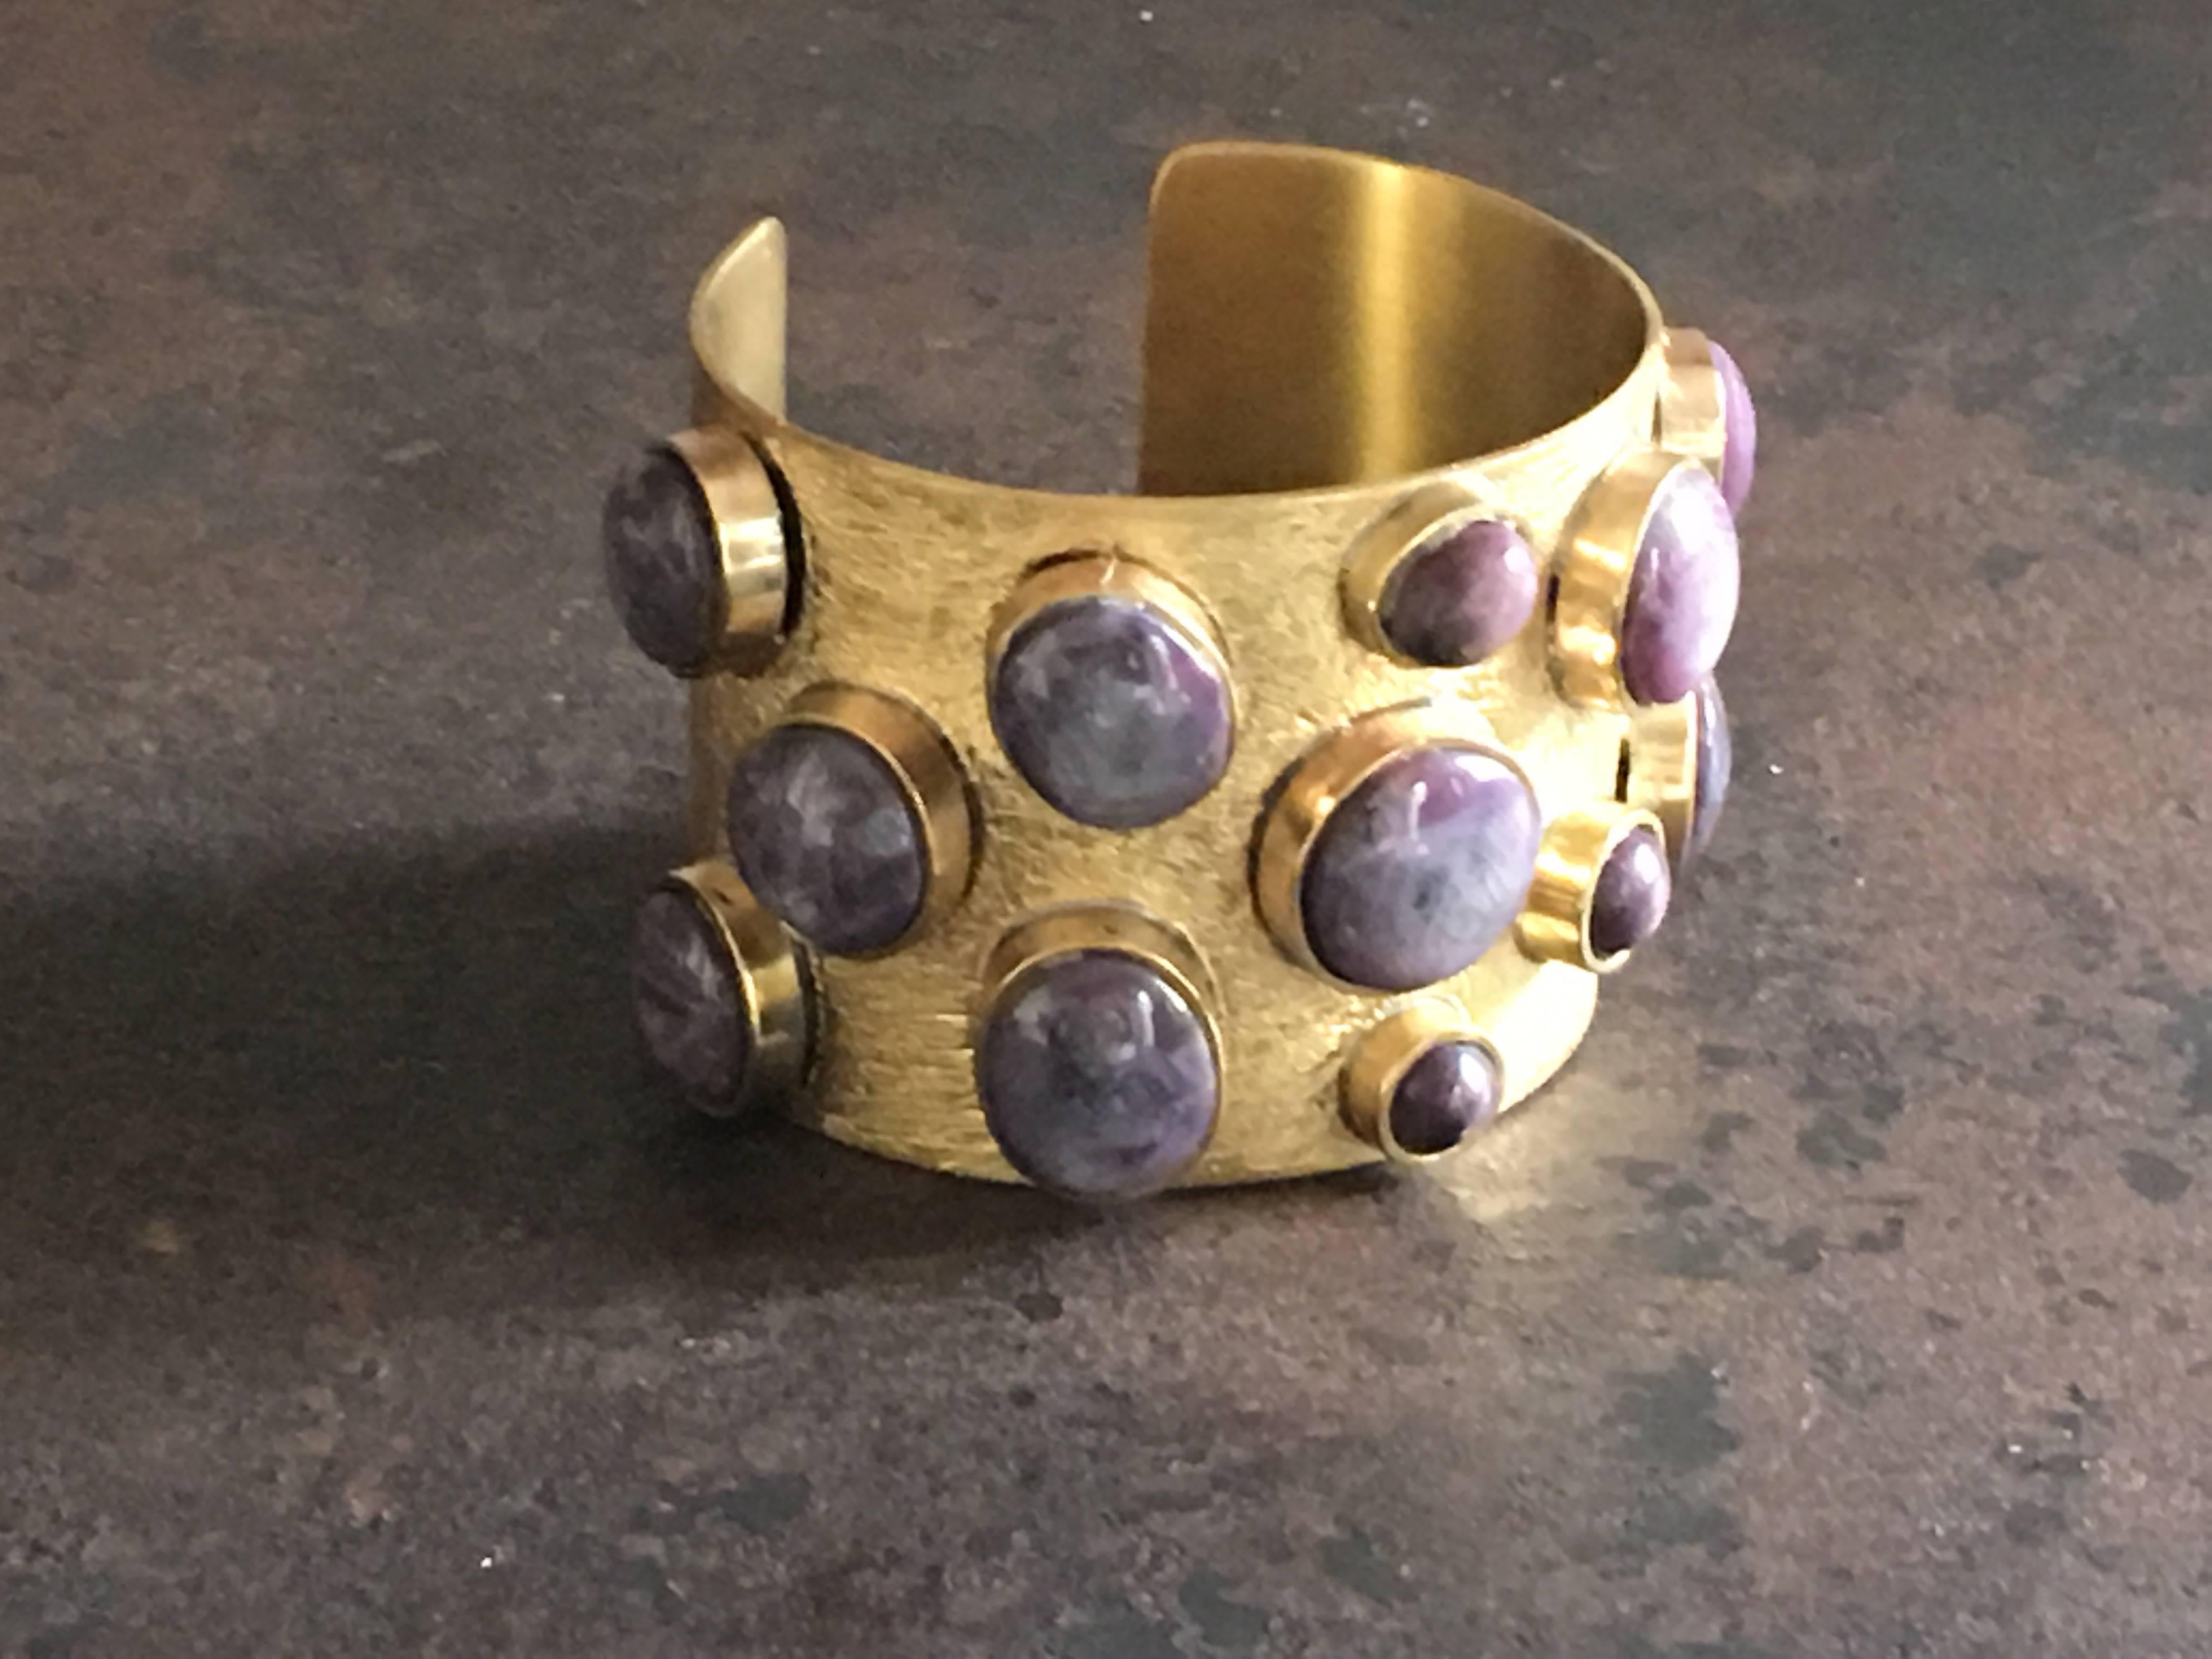 Hand made bangle bizantine style, bronze,   star ruby cabochon different shape and measures. All made by hand.
All Giulia Colussi jewelry is new and has never been previously owned or worn. Each item will arrive at your door beautifully gift wrapped